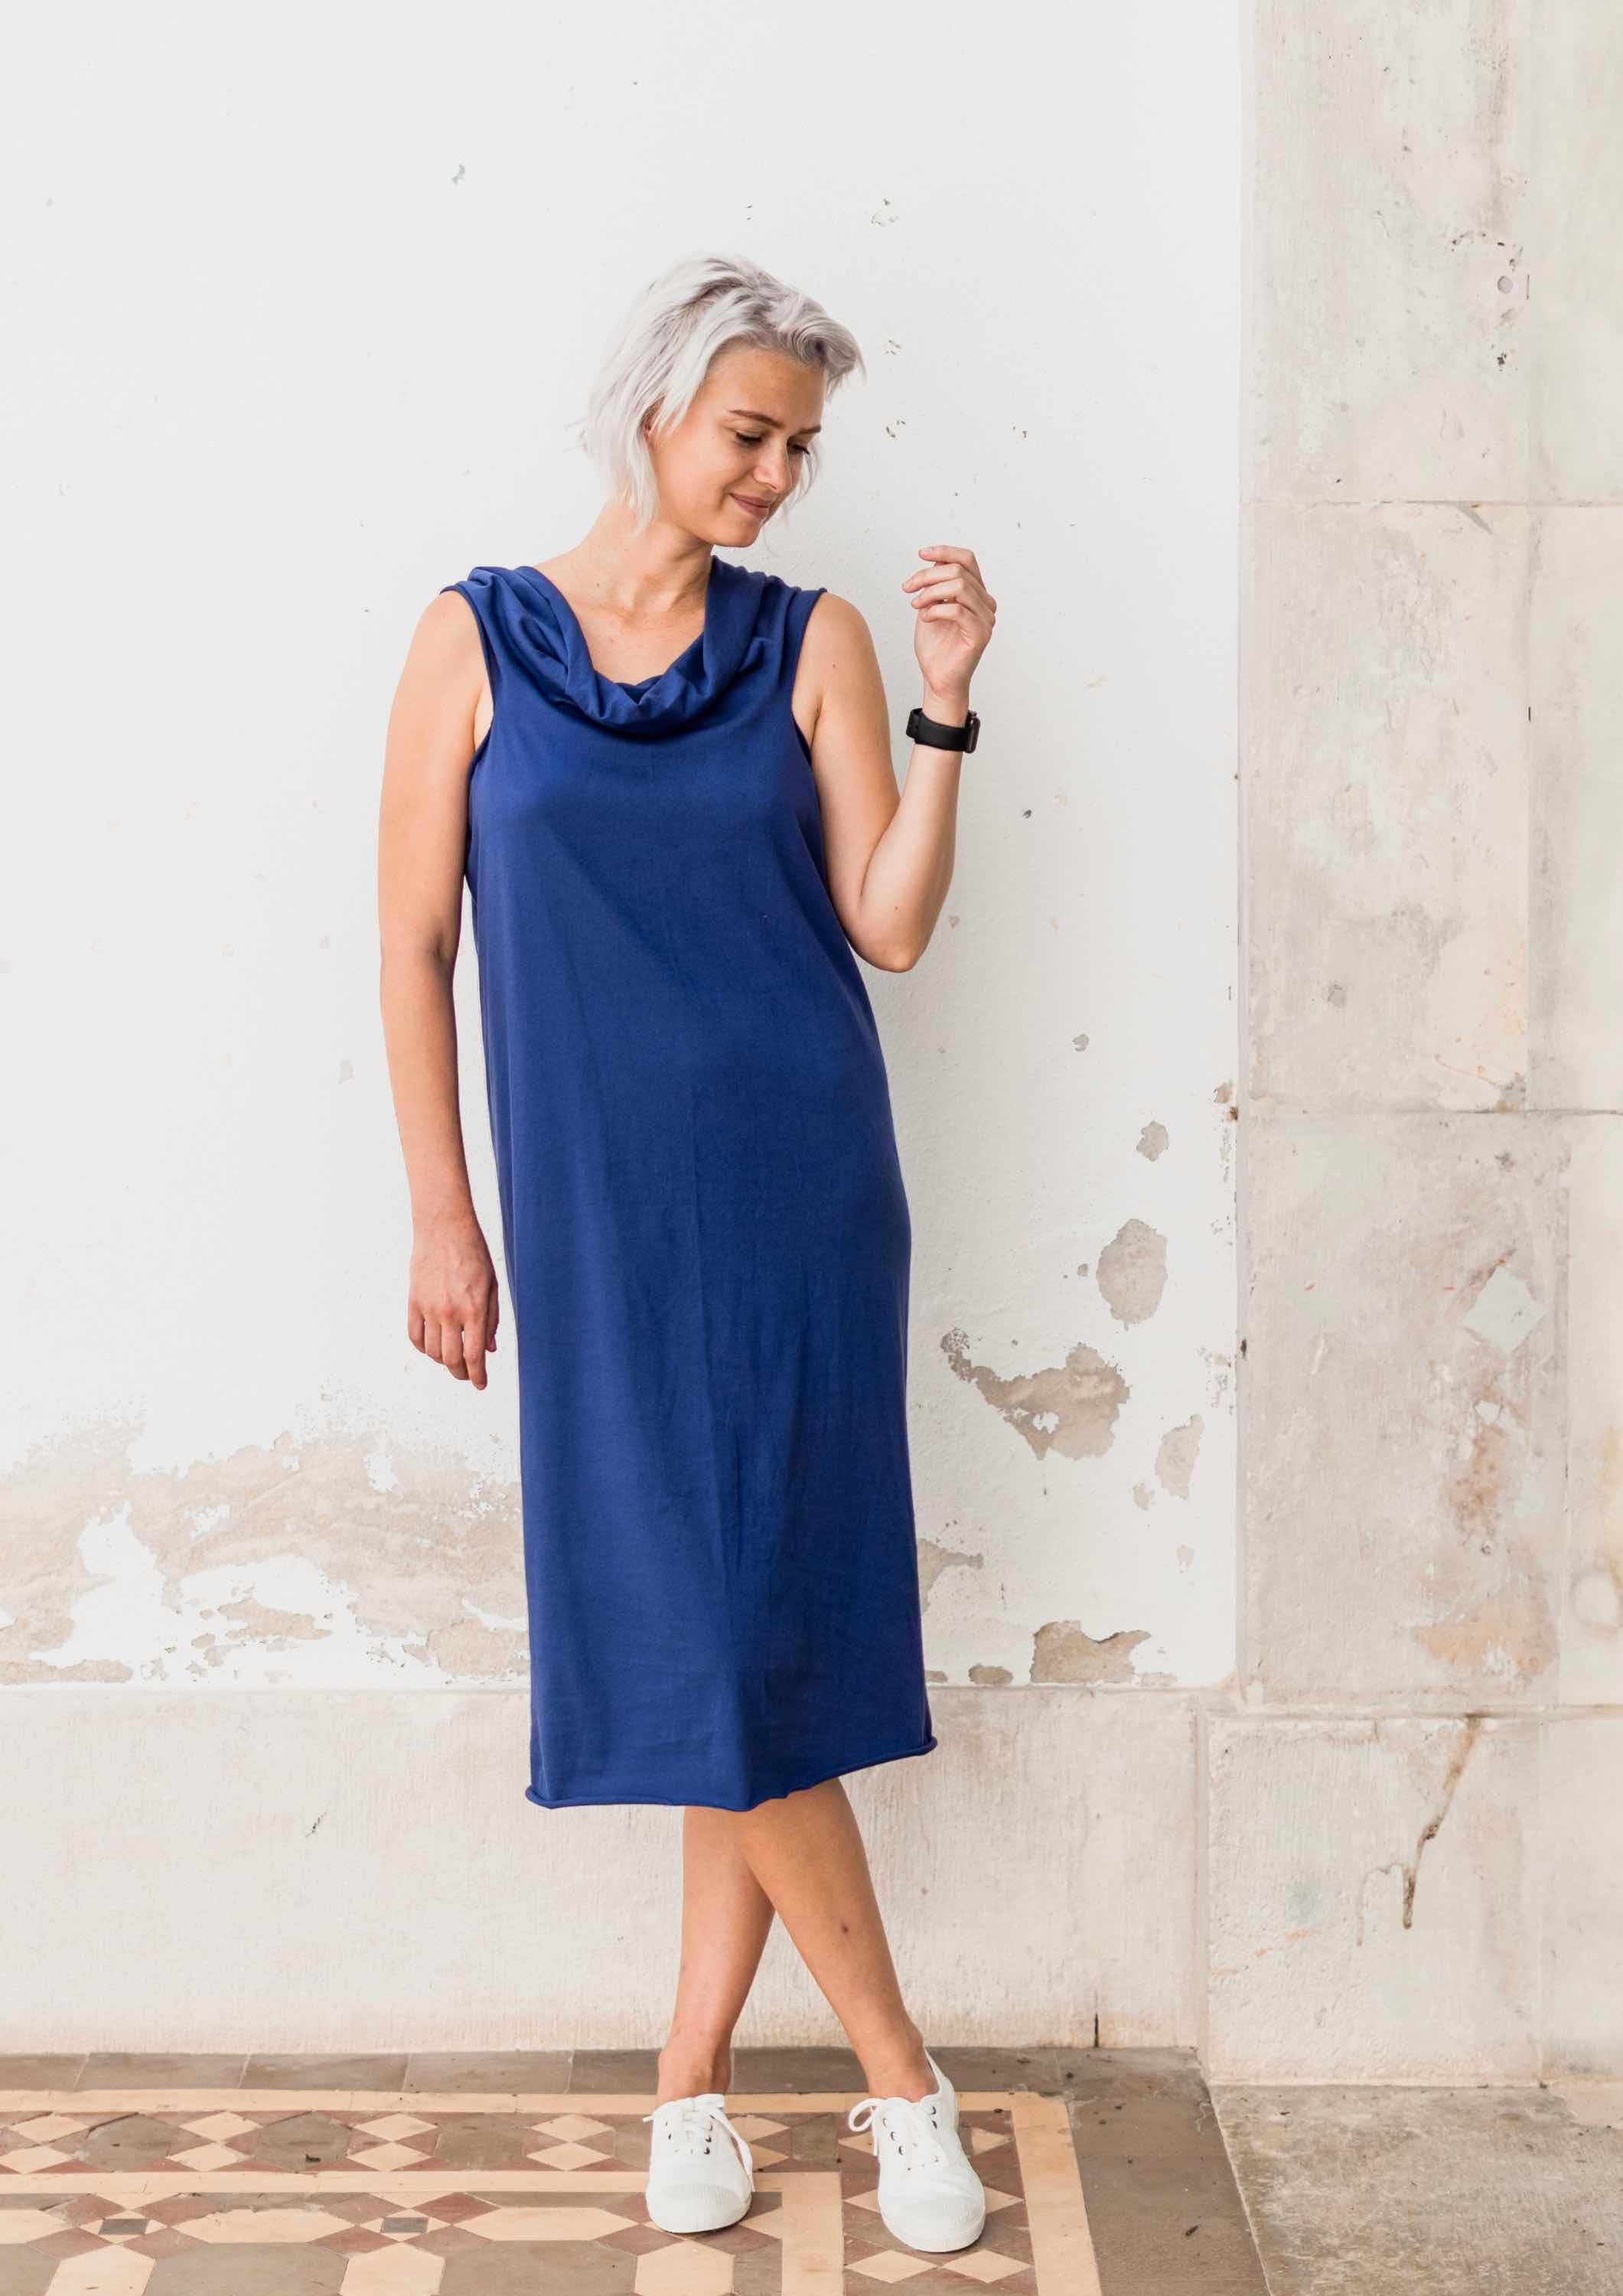 Multifunctional lightweight jersey. Can be worn as a long dress, crop top, t-shirt with scarf or neckholder. In the colour blueberry. Seamless.